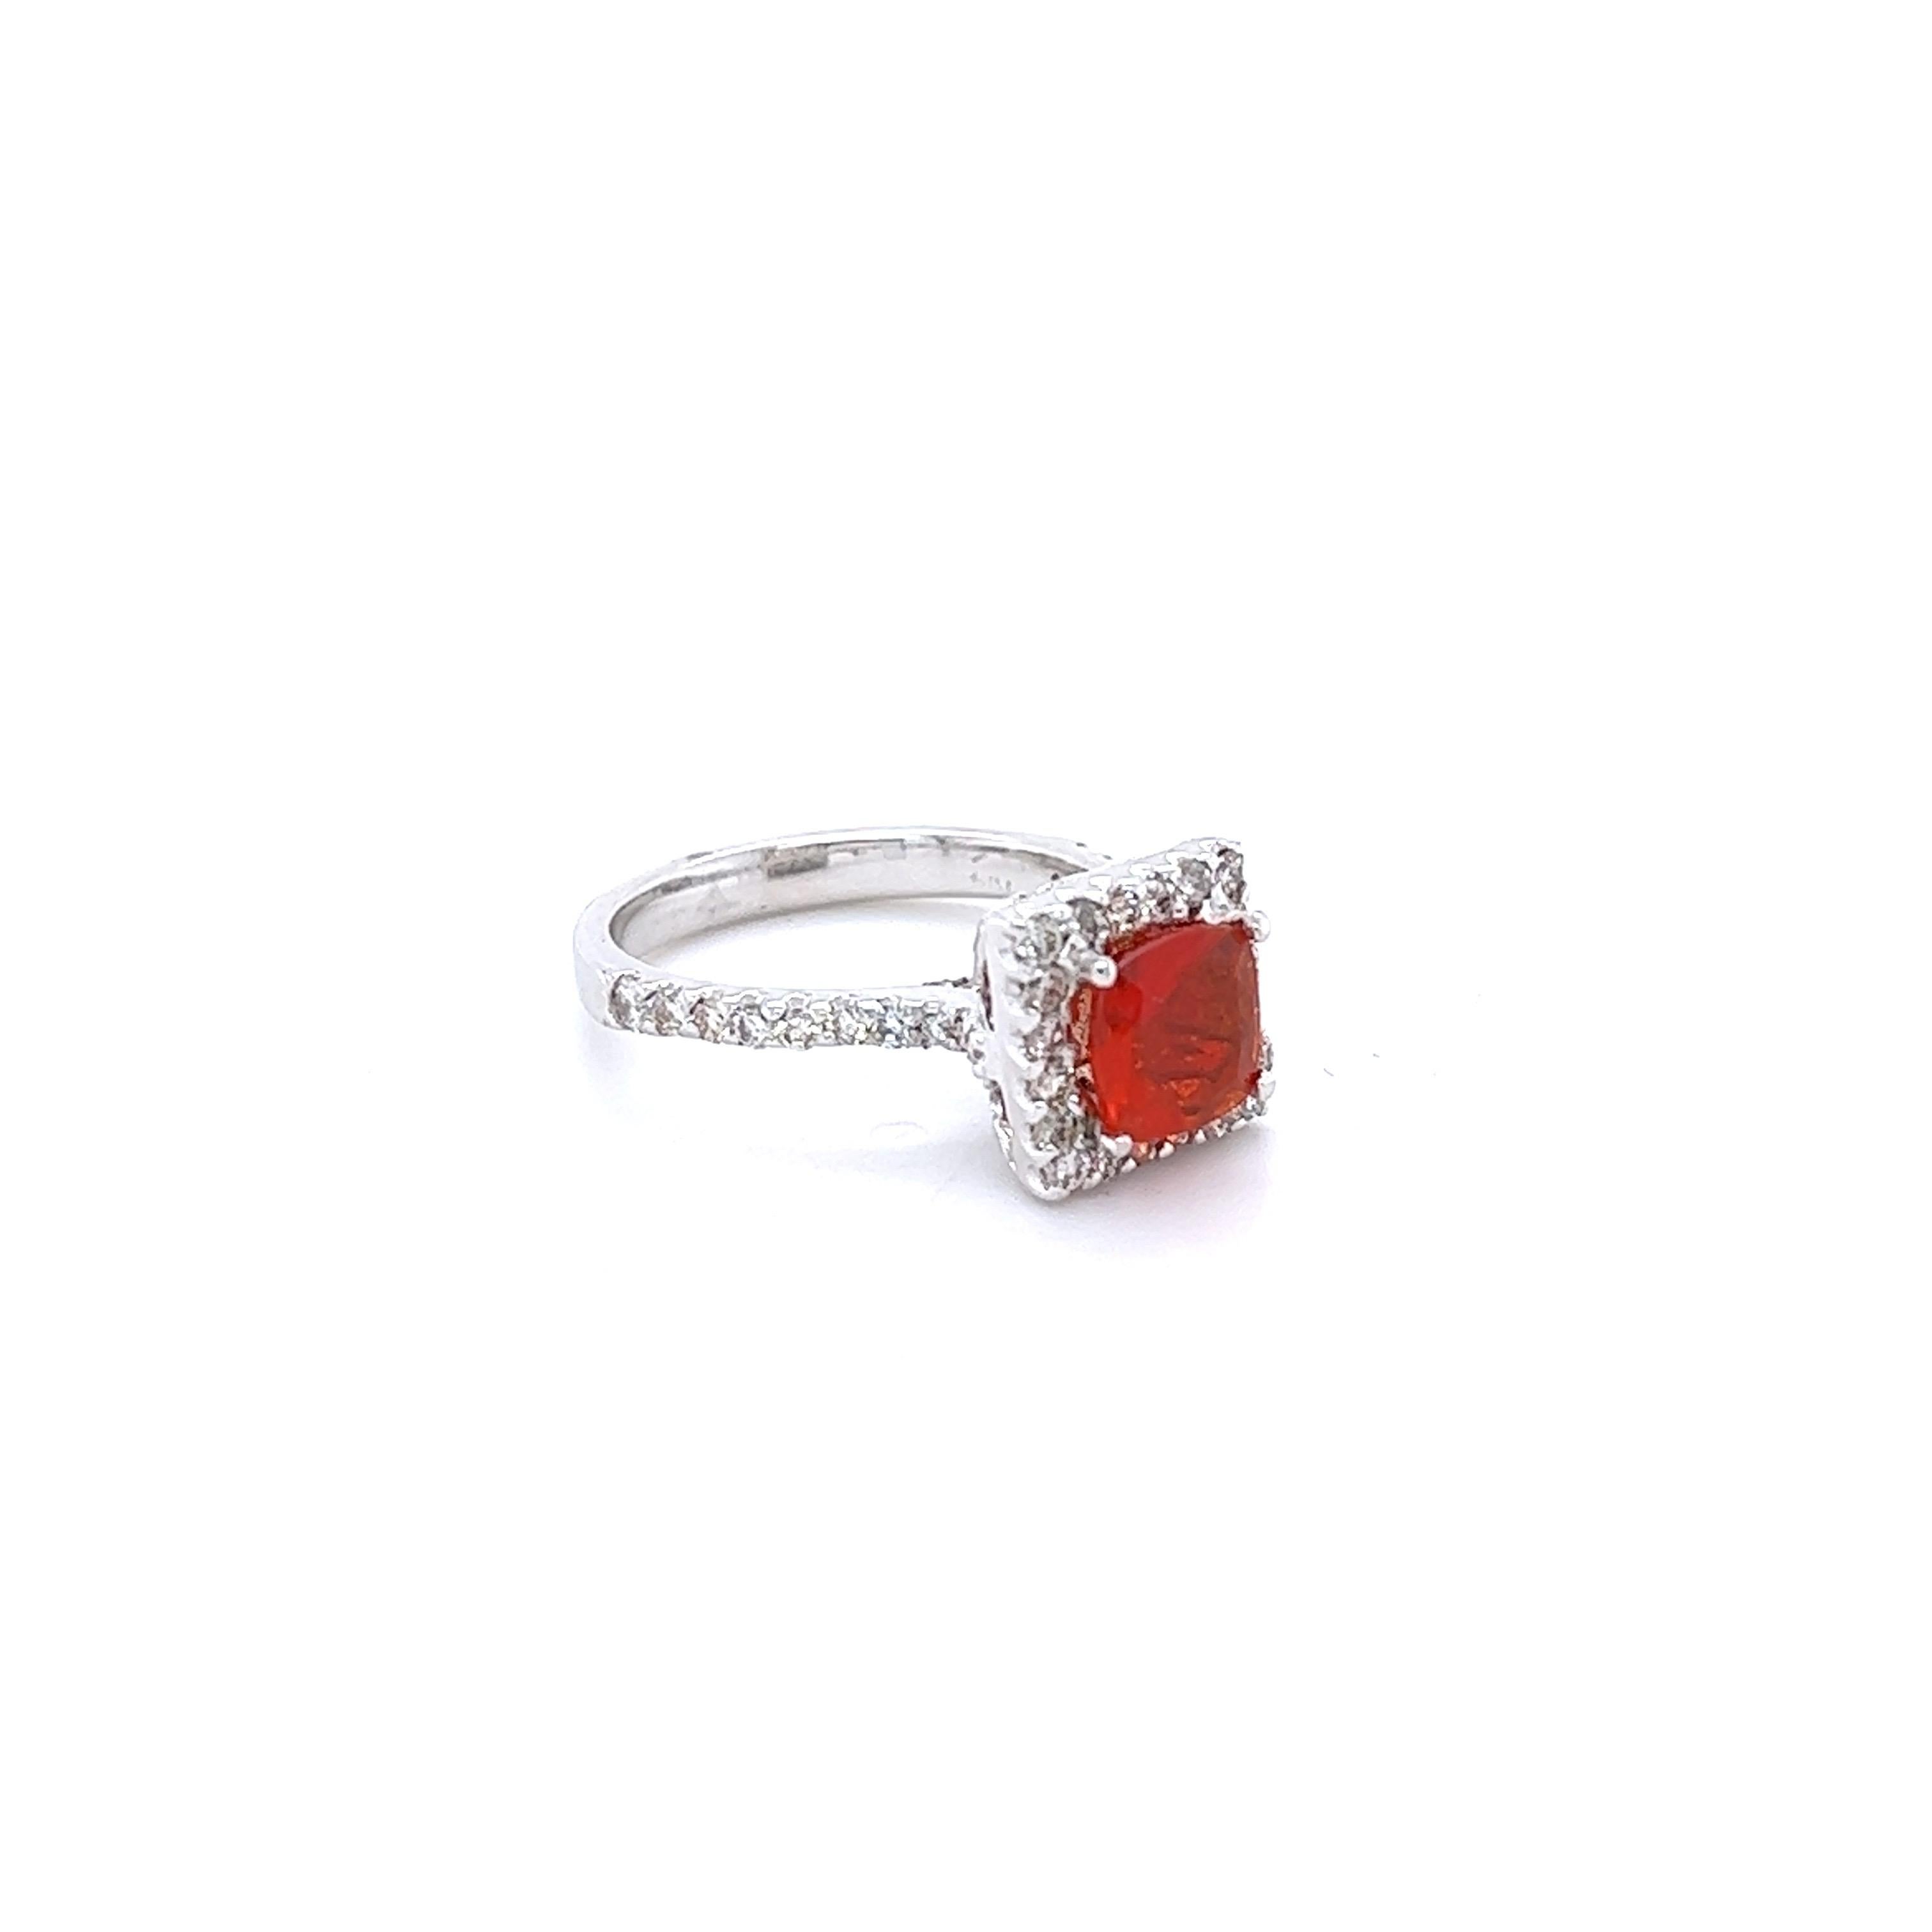 This ring has a Cushion Cut 0.85 carat Fire Opal in the center of the ring and is surrounded by 73 Round Cut Diamonds that weigh a total of 0.93 carat (Clarity:  VS2, Color: H).  The total carat weight of the ring is 1.78 carats.  
The ring is